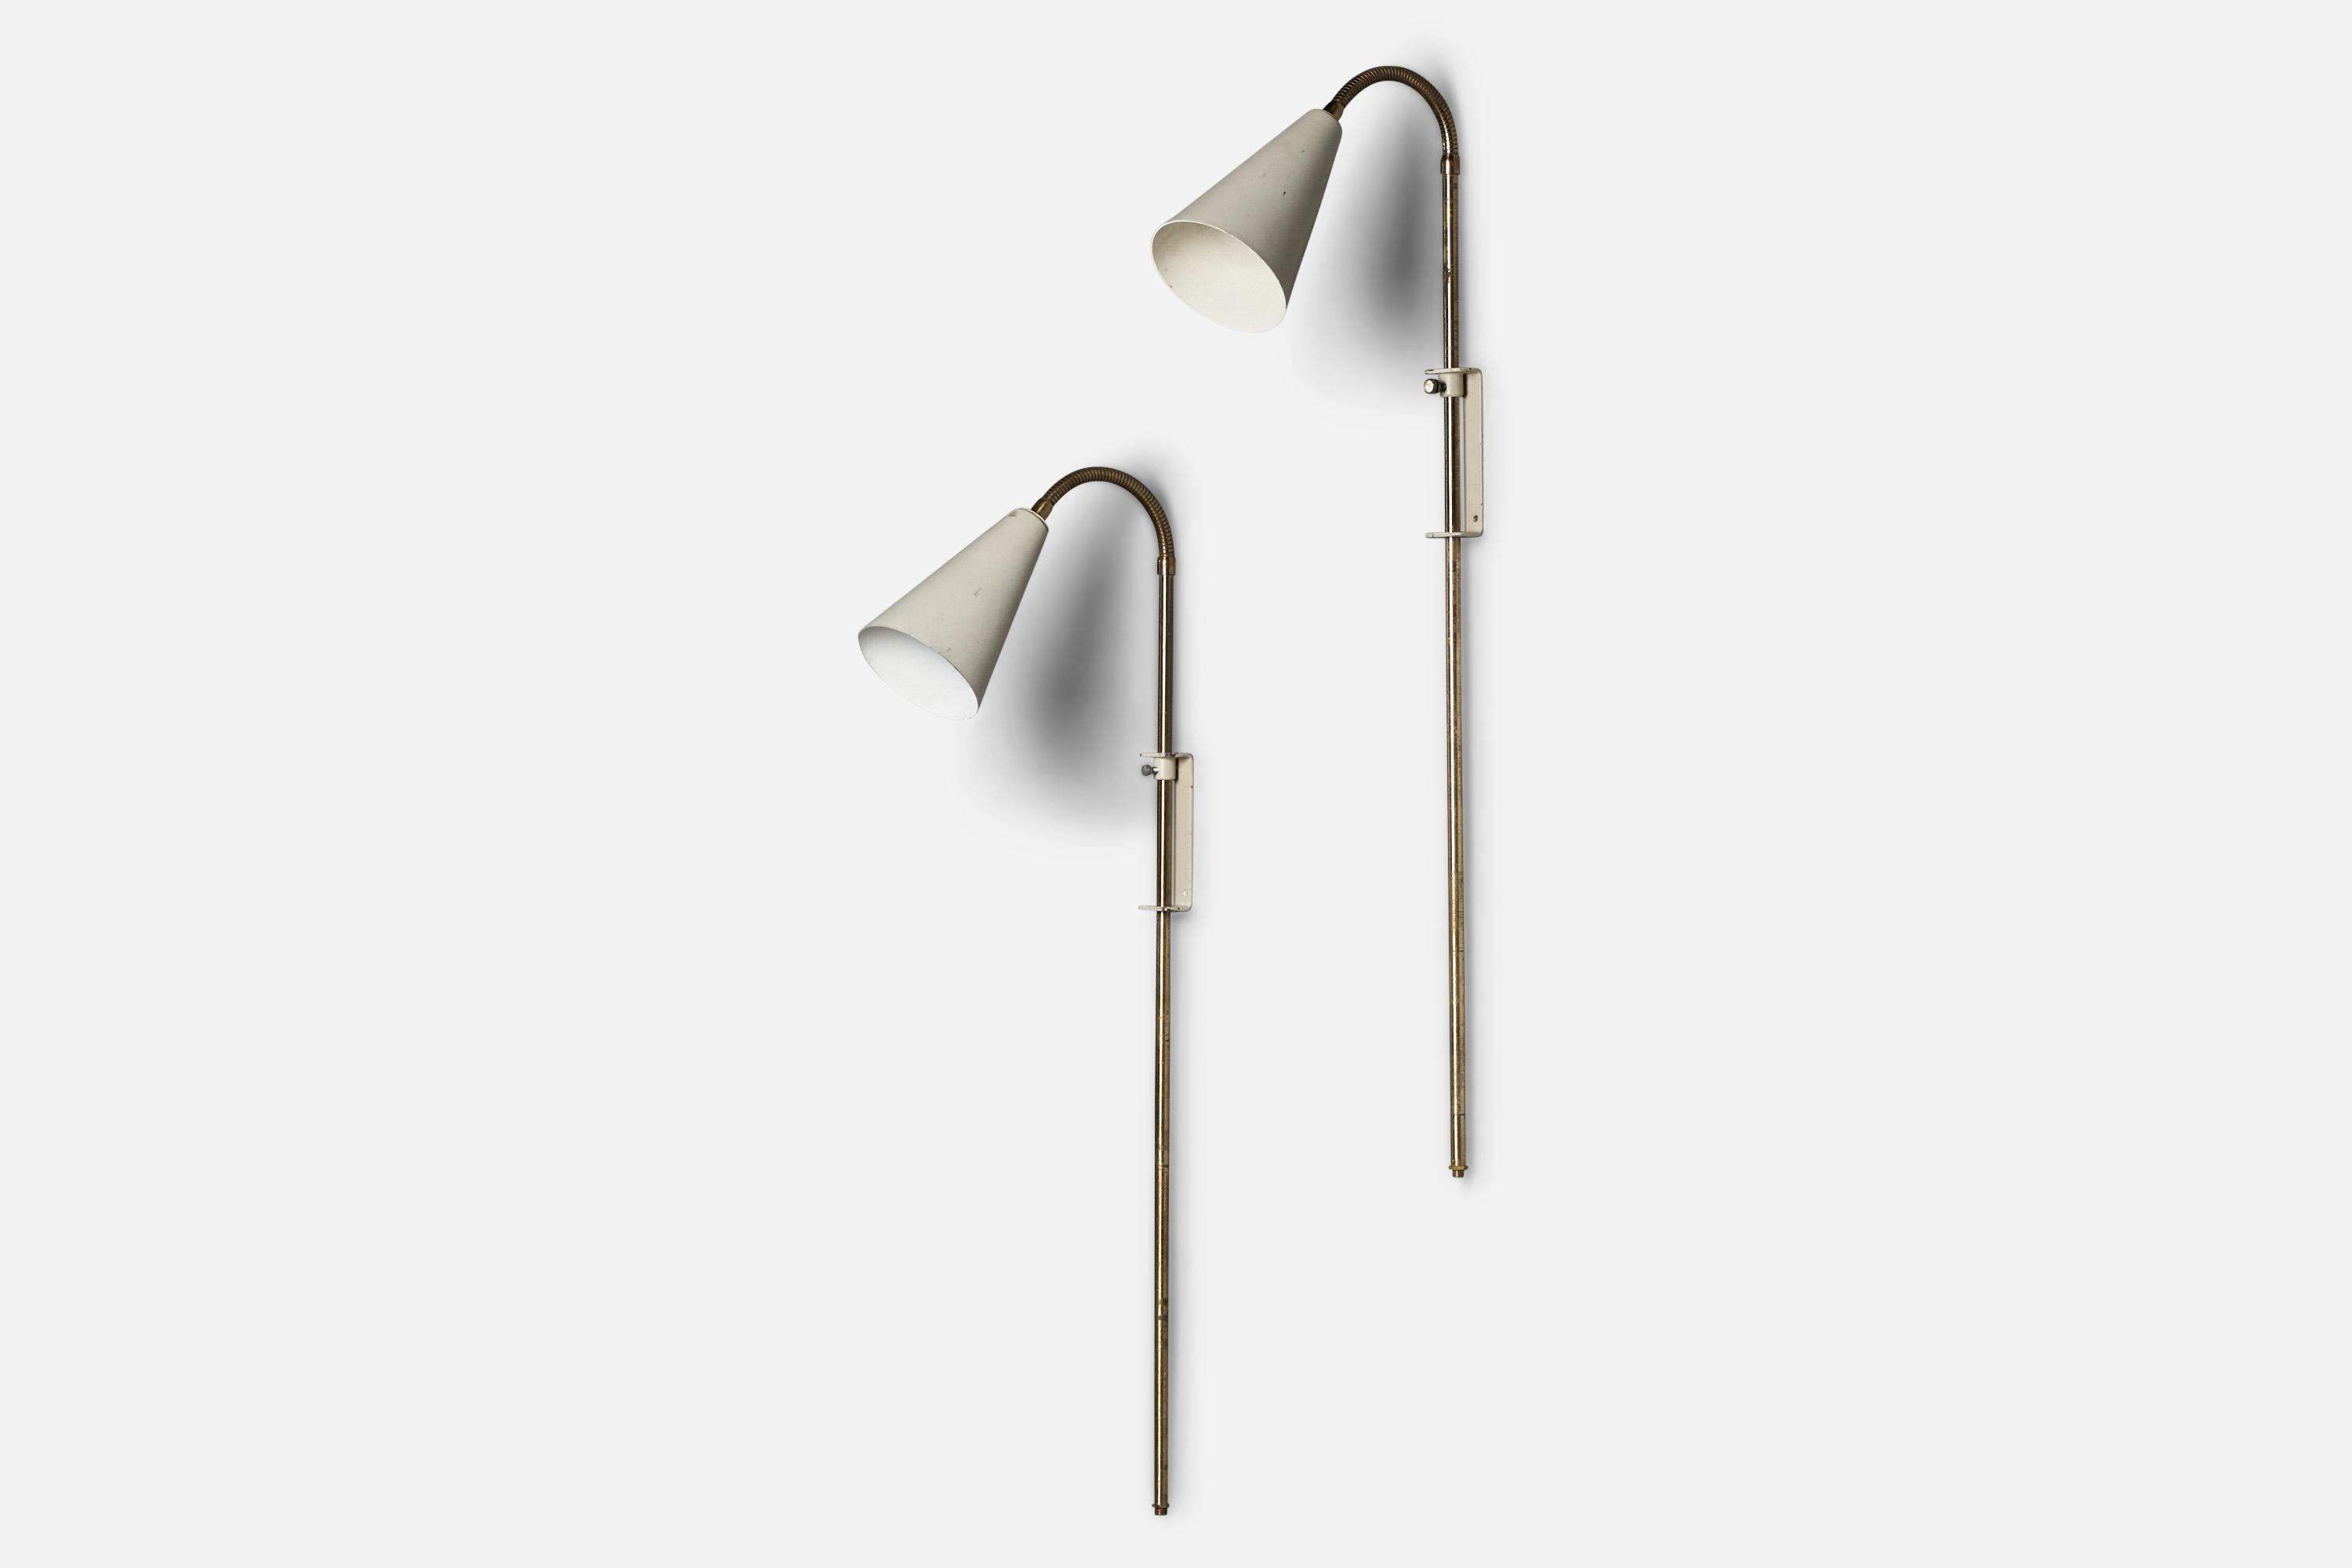 A pair of adjustable brass and white-lacquered metal wall lights, designed and produced in Sweden, 1950s.

Note that cord runs from bottom of stem, functioning via plug in. Not convertible to hardwire.

Overall Dimensions (inches): 33.25